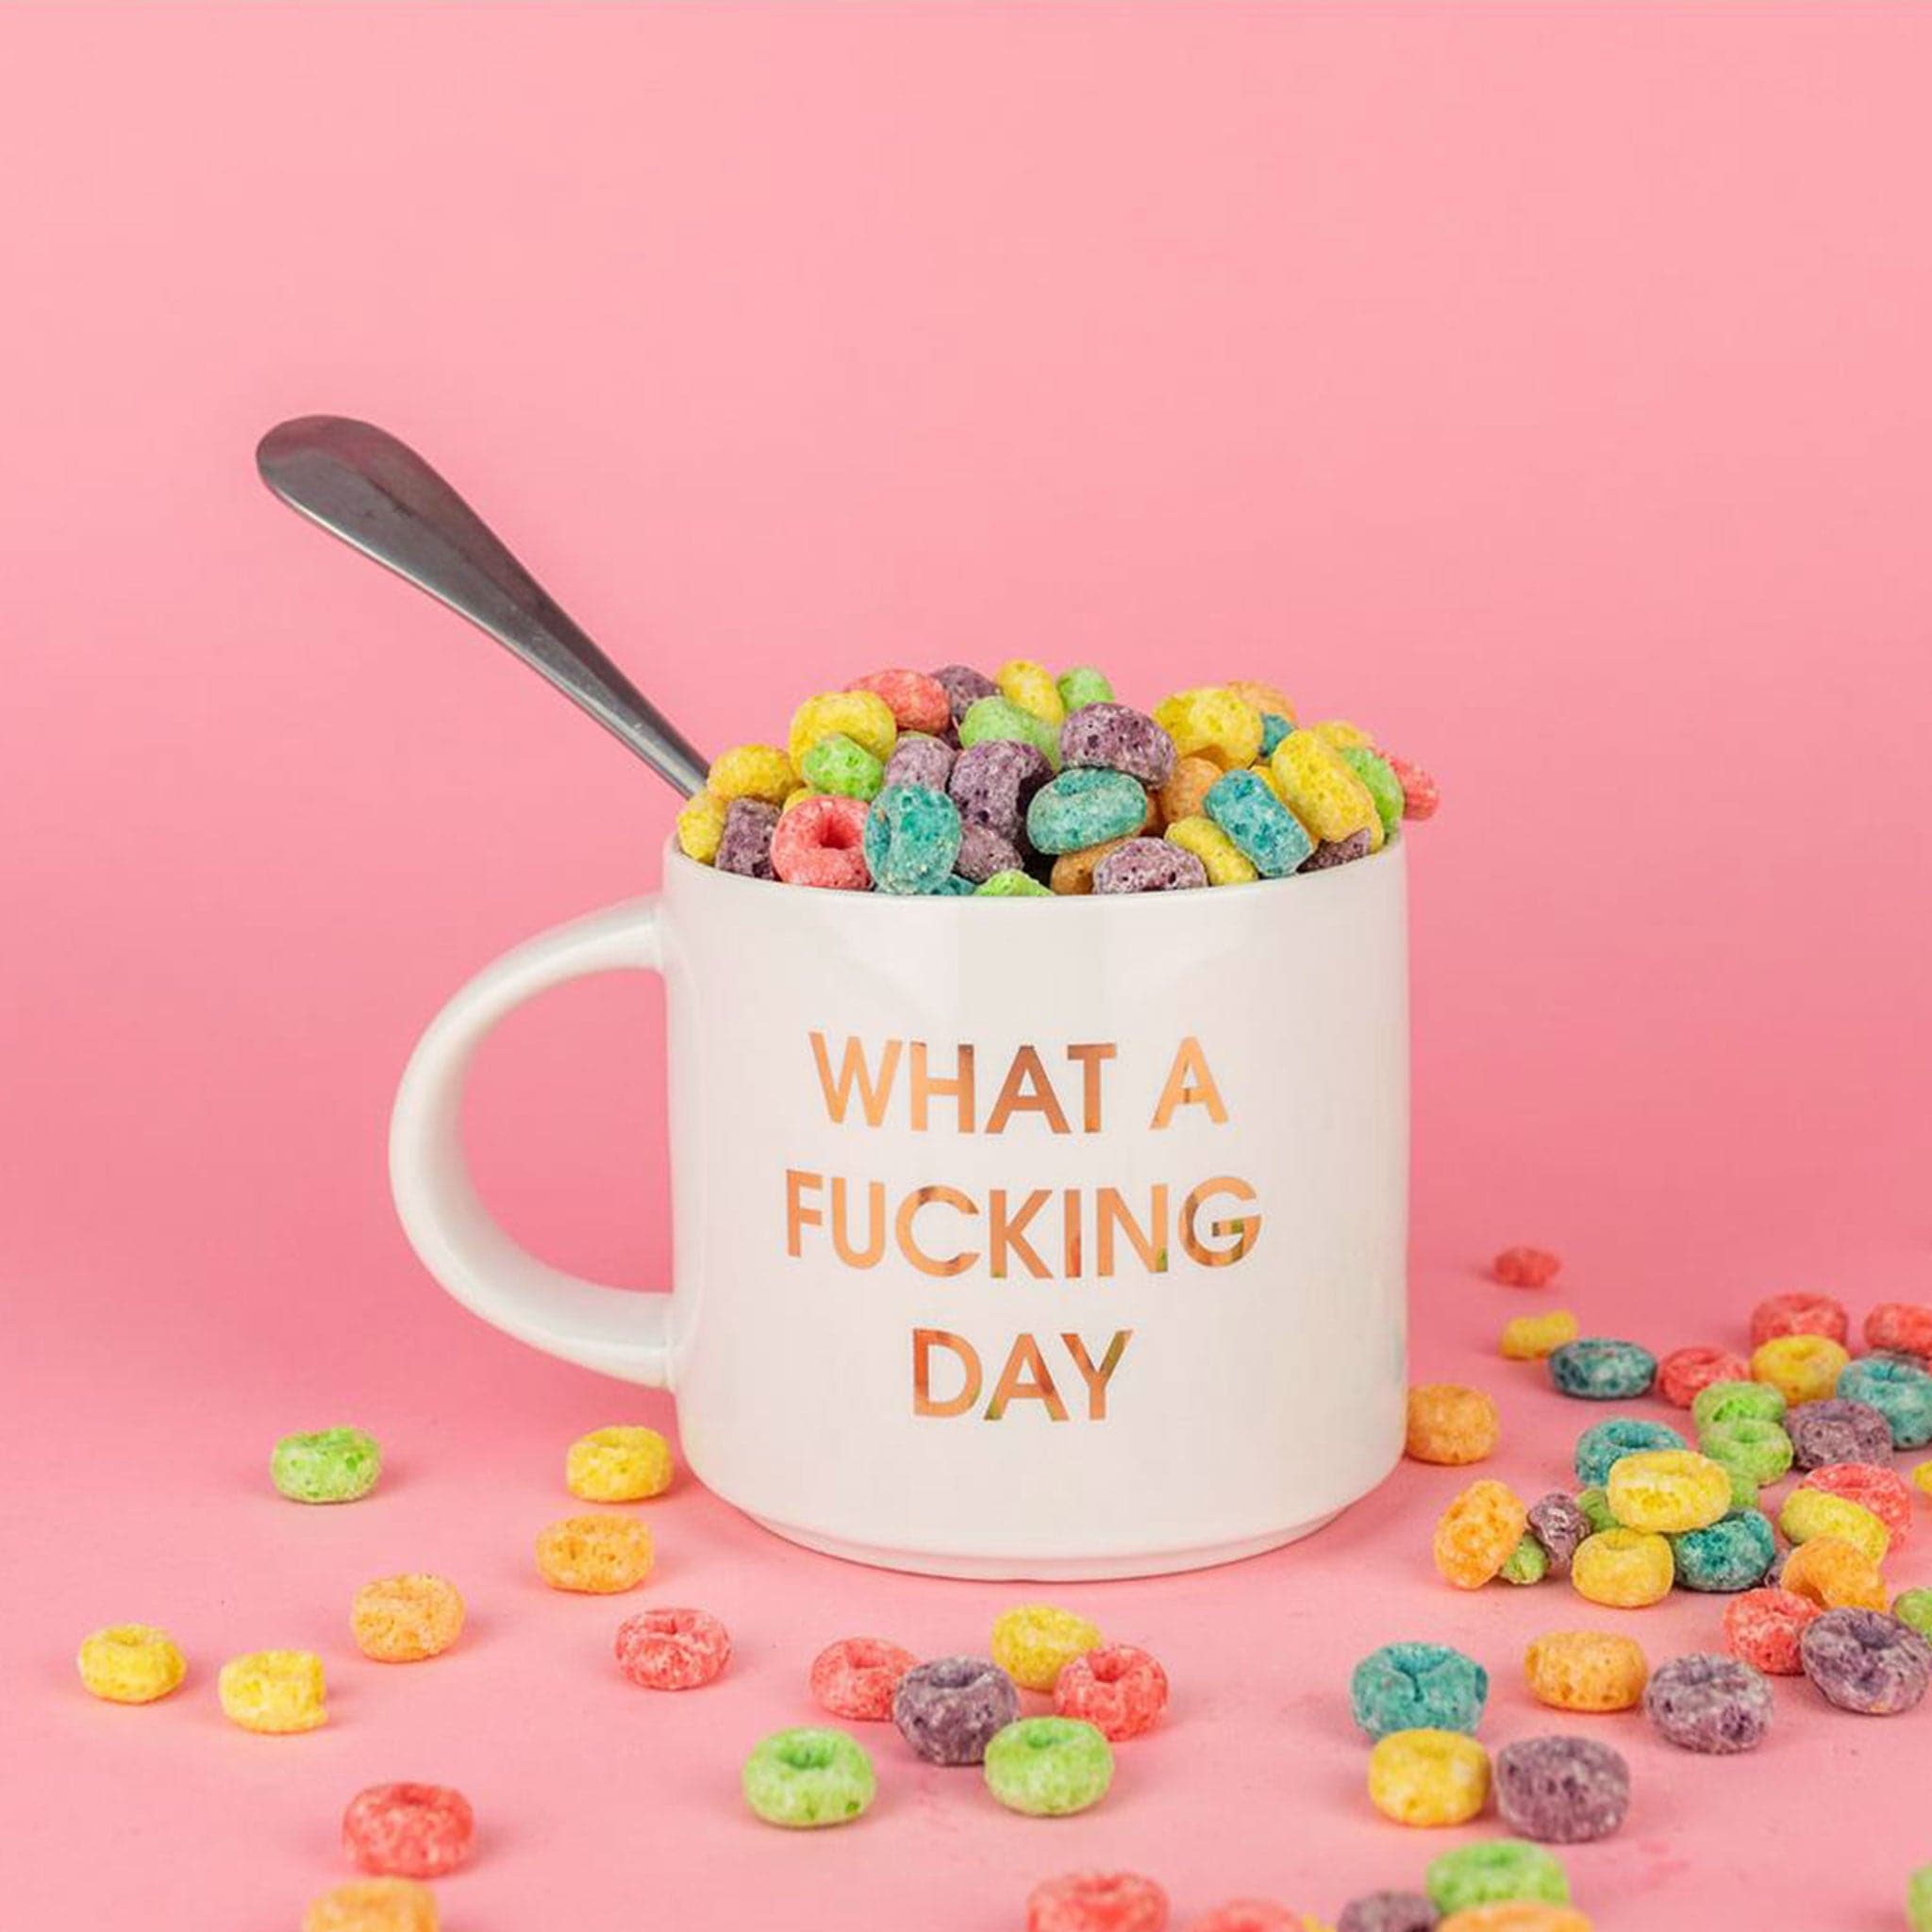 Classic white ceramic mug labeled 'What a Fucking Day' in gold shimmering capital lettering. Mug has a round white handle fasted on the left hand side. Mug is filled with overflowing, rainbow colored fruit loops. Behind lays a bright pink background.